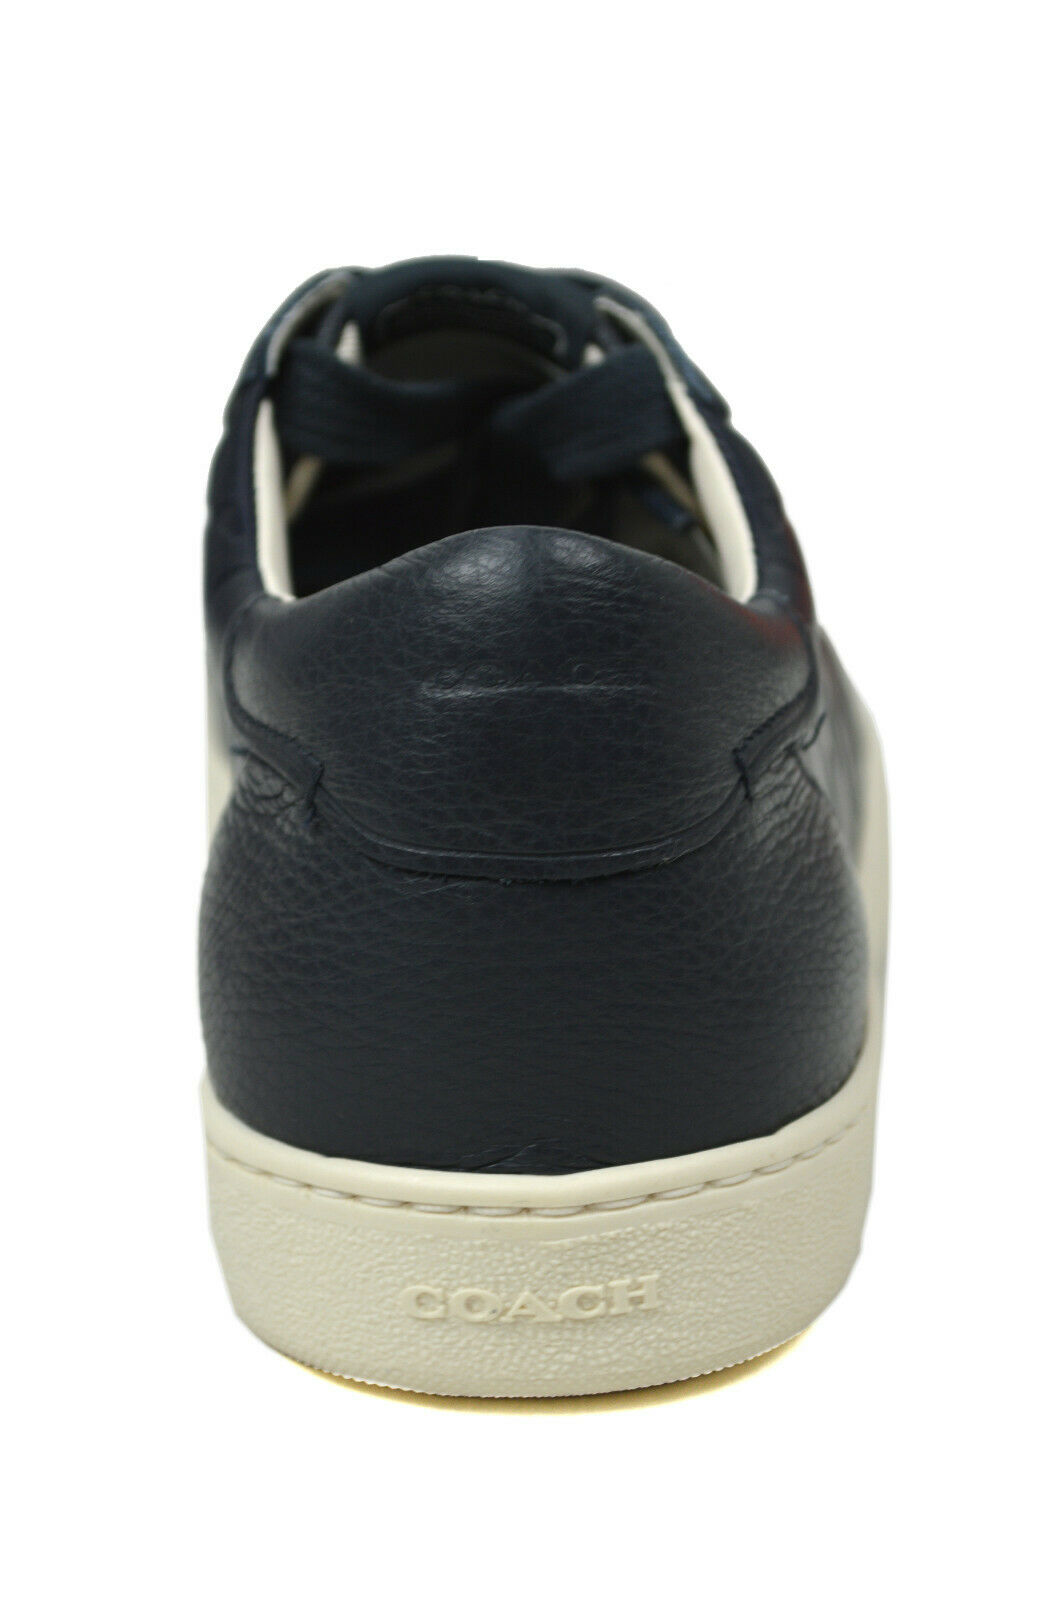 New  Coach Mens C126 Navy Blue Signature Leather Low Top Sneakers Sz 9.5 D 8994-3 - image 4 of 4